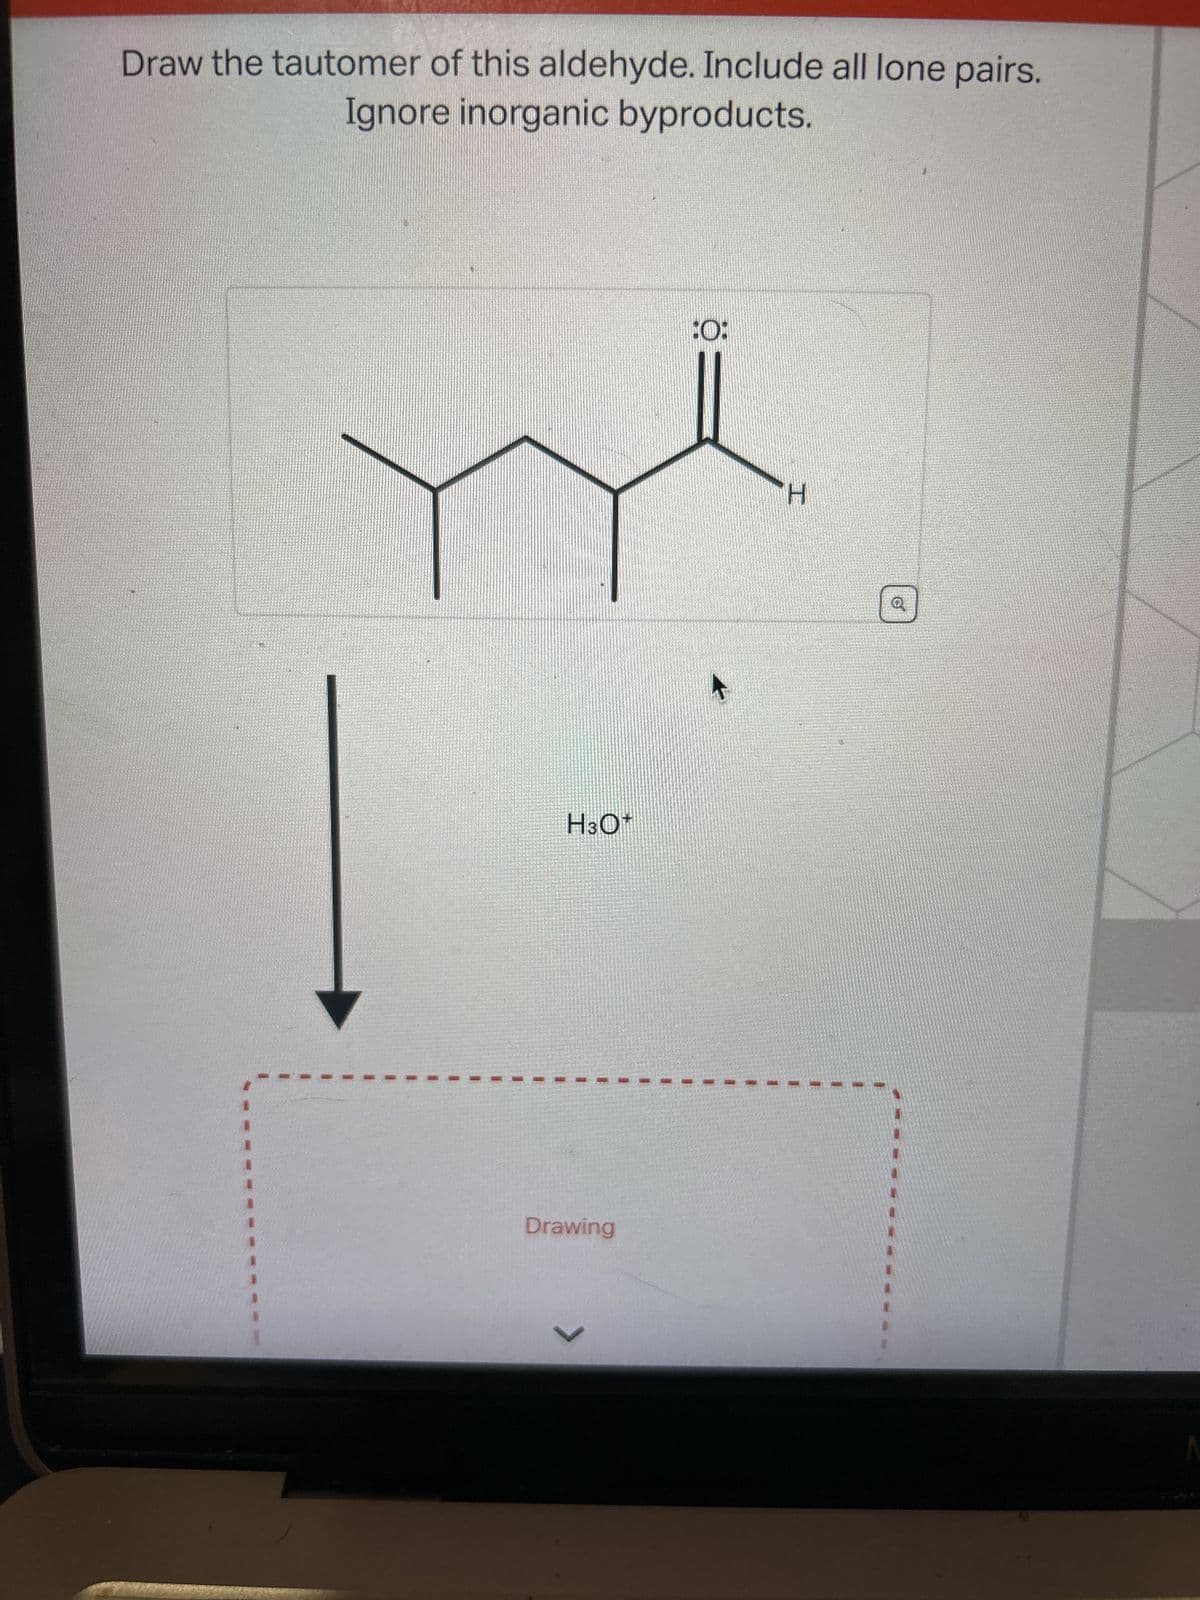 Draw the tautomer of this aldehyde. Include all lone pairs.
Ignore inorganic byproducts.
H3O*
Drawing
✓
:O:
H